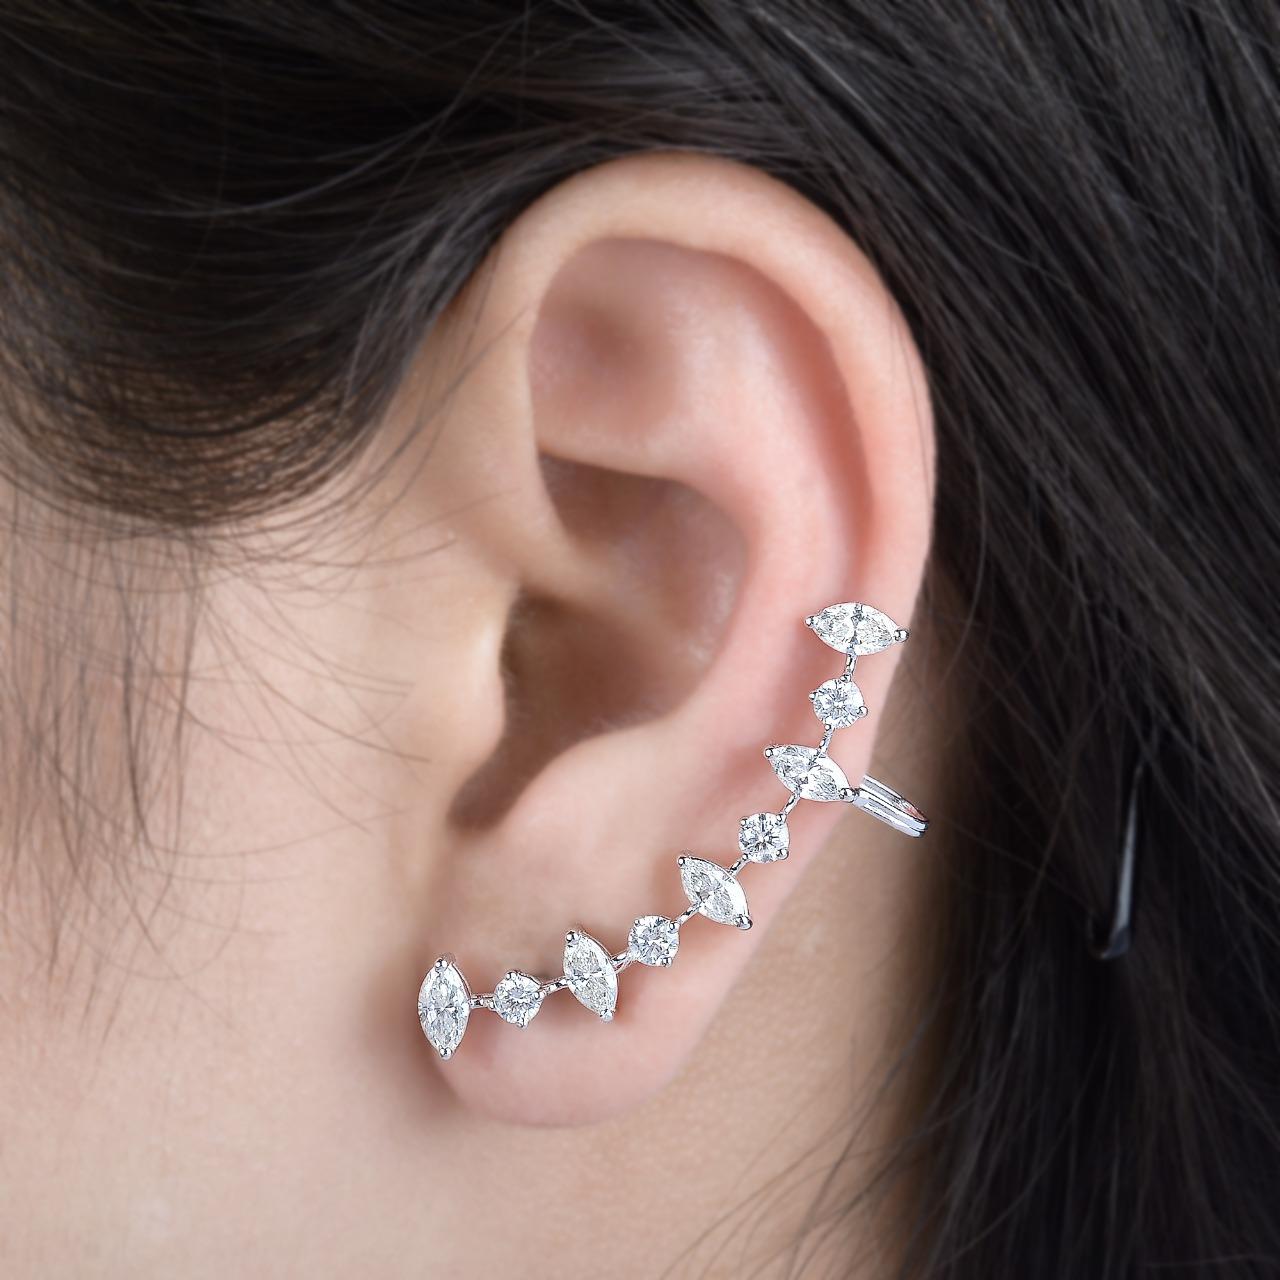 These ear cuff are handmade in 14-karat gold and beautifully detailed with 1.70 carats diamonds. Show off their unique style by sweeping your hair back.

FOLLOW  MEGHNA JEWELS storefront to view the latest collection & exclusive pieces.  Meghna